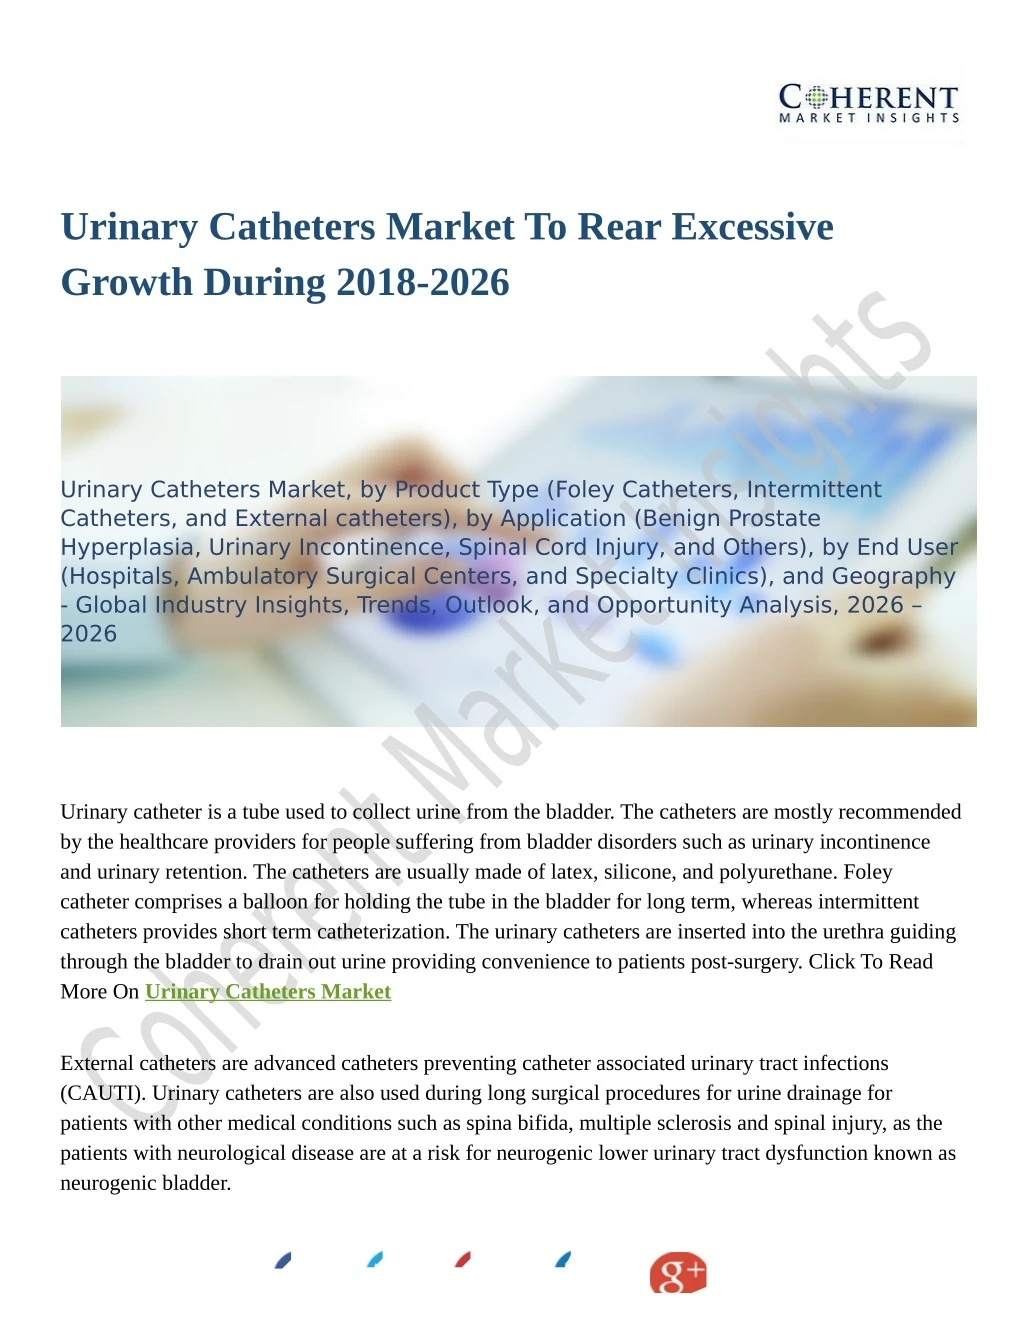 urinary catheters market to rear excessive growth